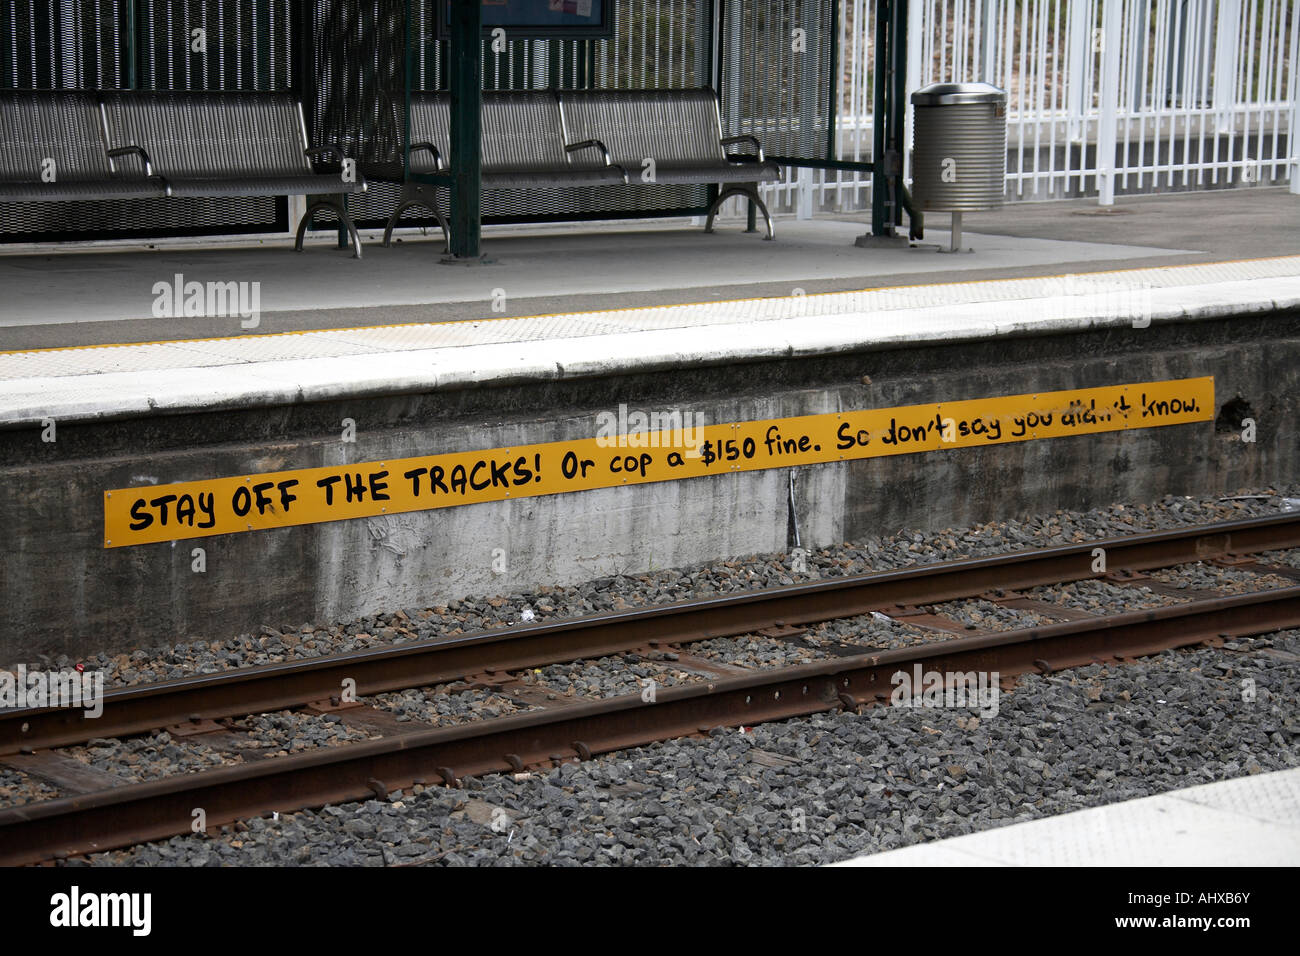 http://c8.alamy.com/comp/AHXB6Y/stay-off-the-tracks-or-cop-a-150-fine-warning-sign-on-railway-station-AHXB6Y.jpg